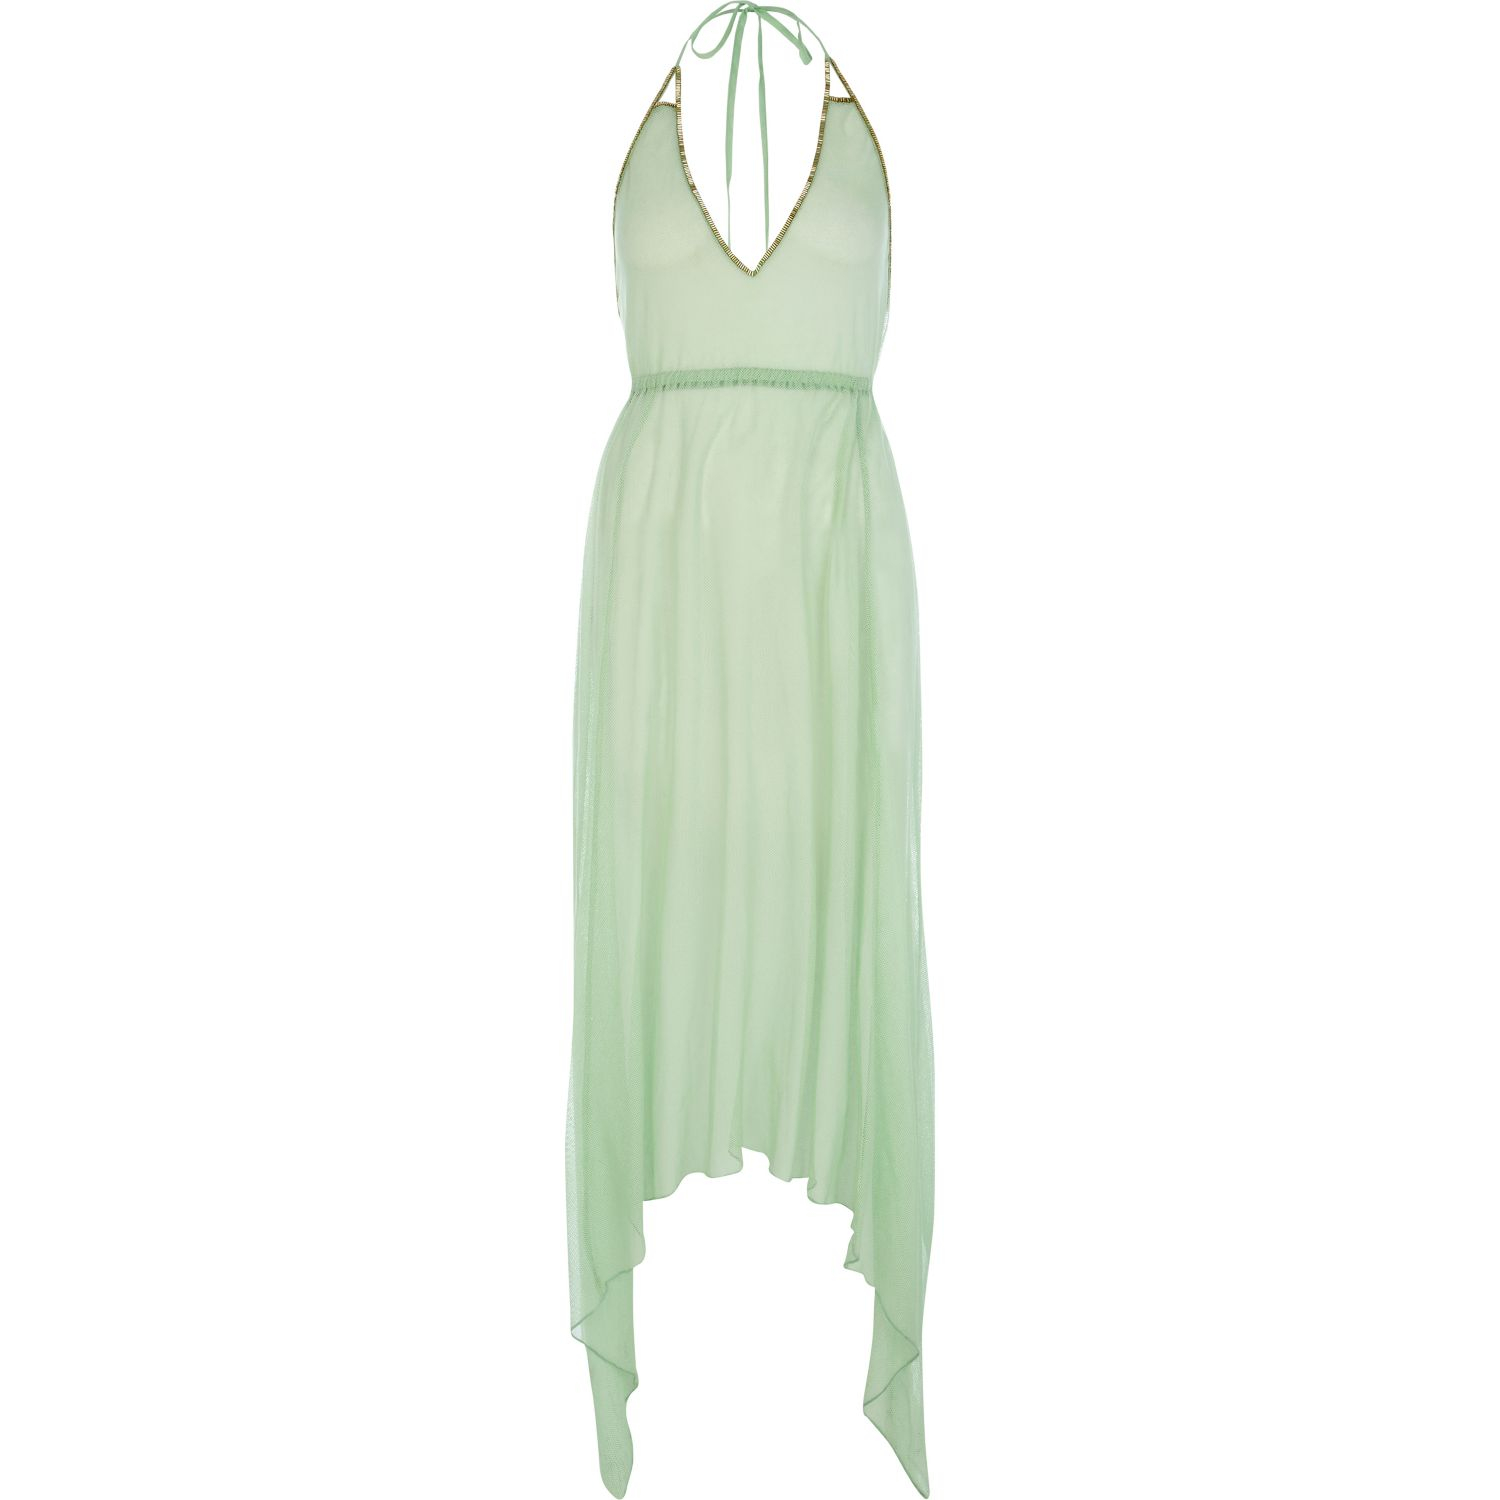 Green River Island Dress And Simple Guide To Choosing